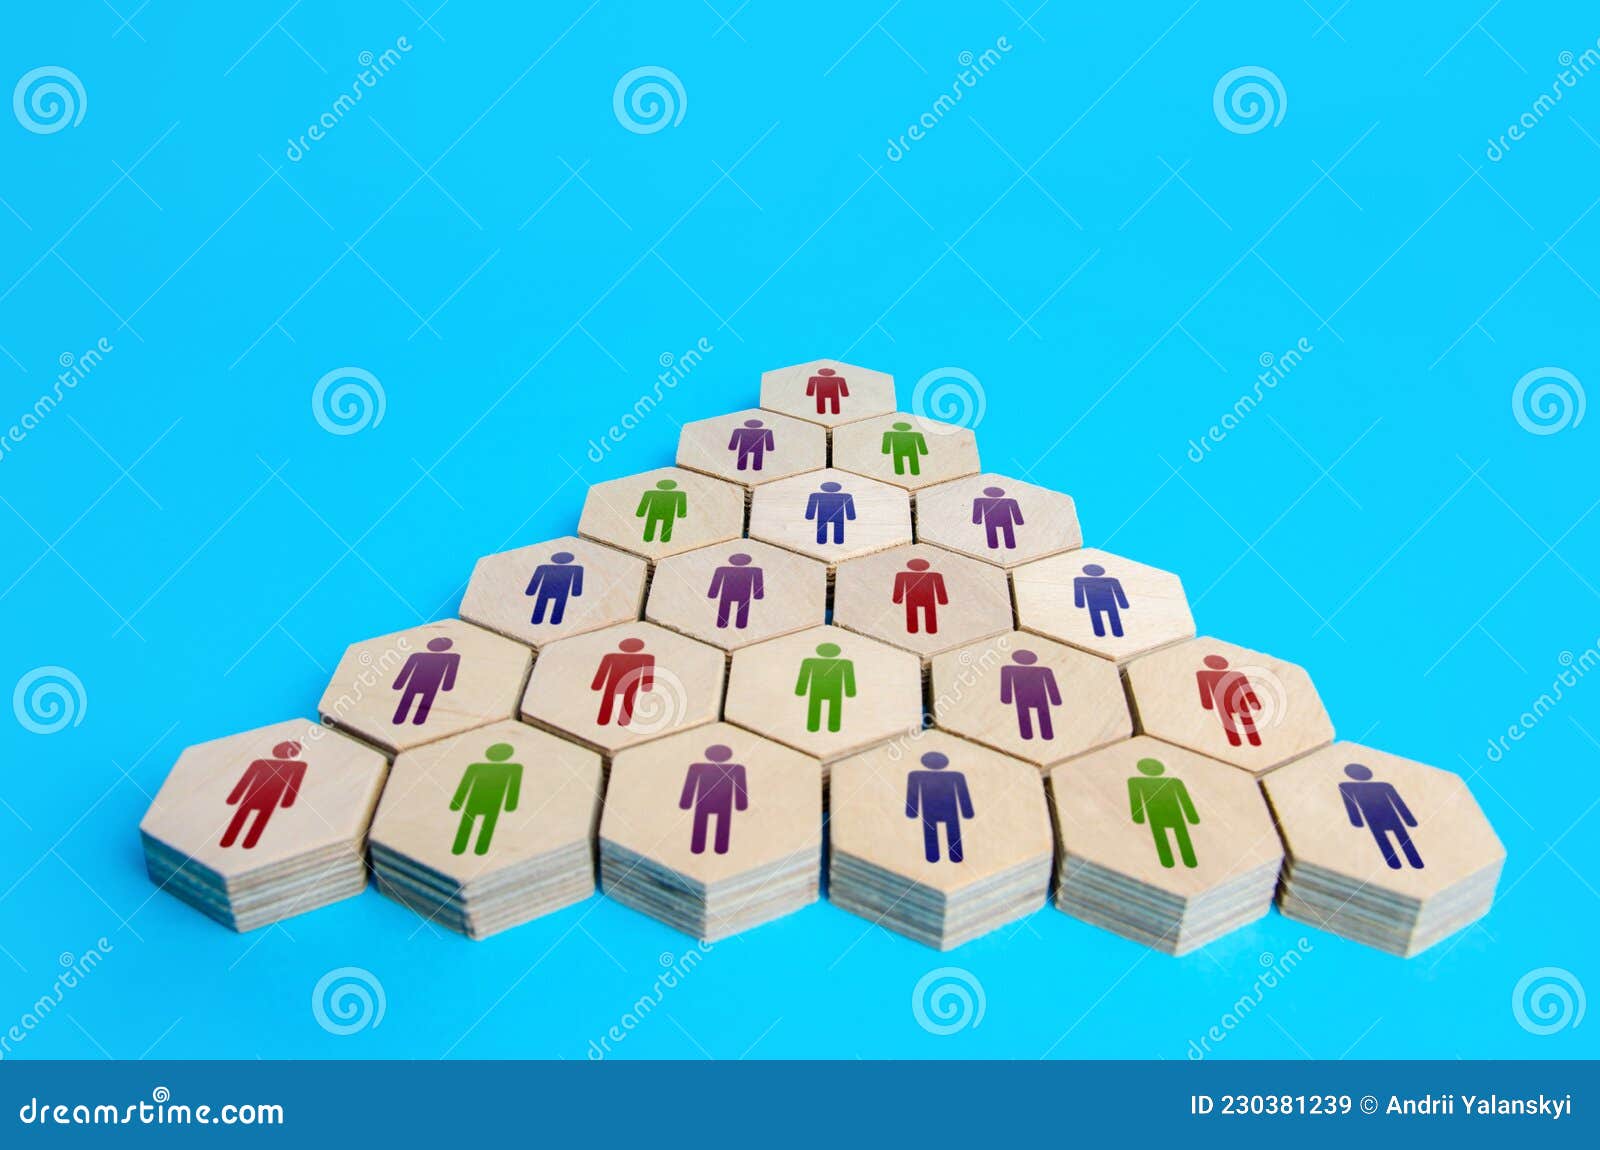 collective hierarchy gathering of people. hierarchical pyramid of the company. unity and diversity. multiculturalism. meritocracy